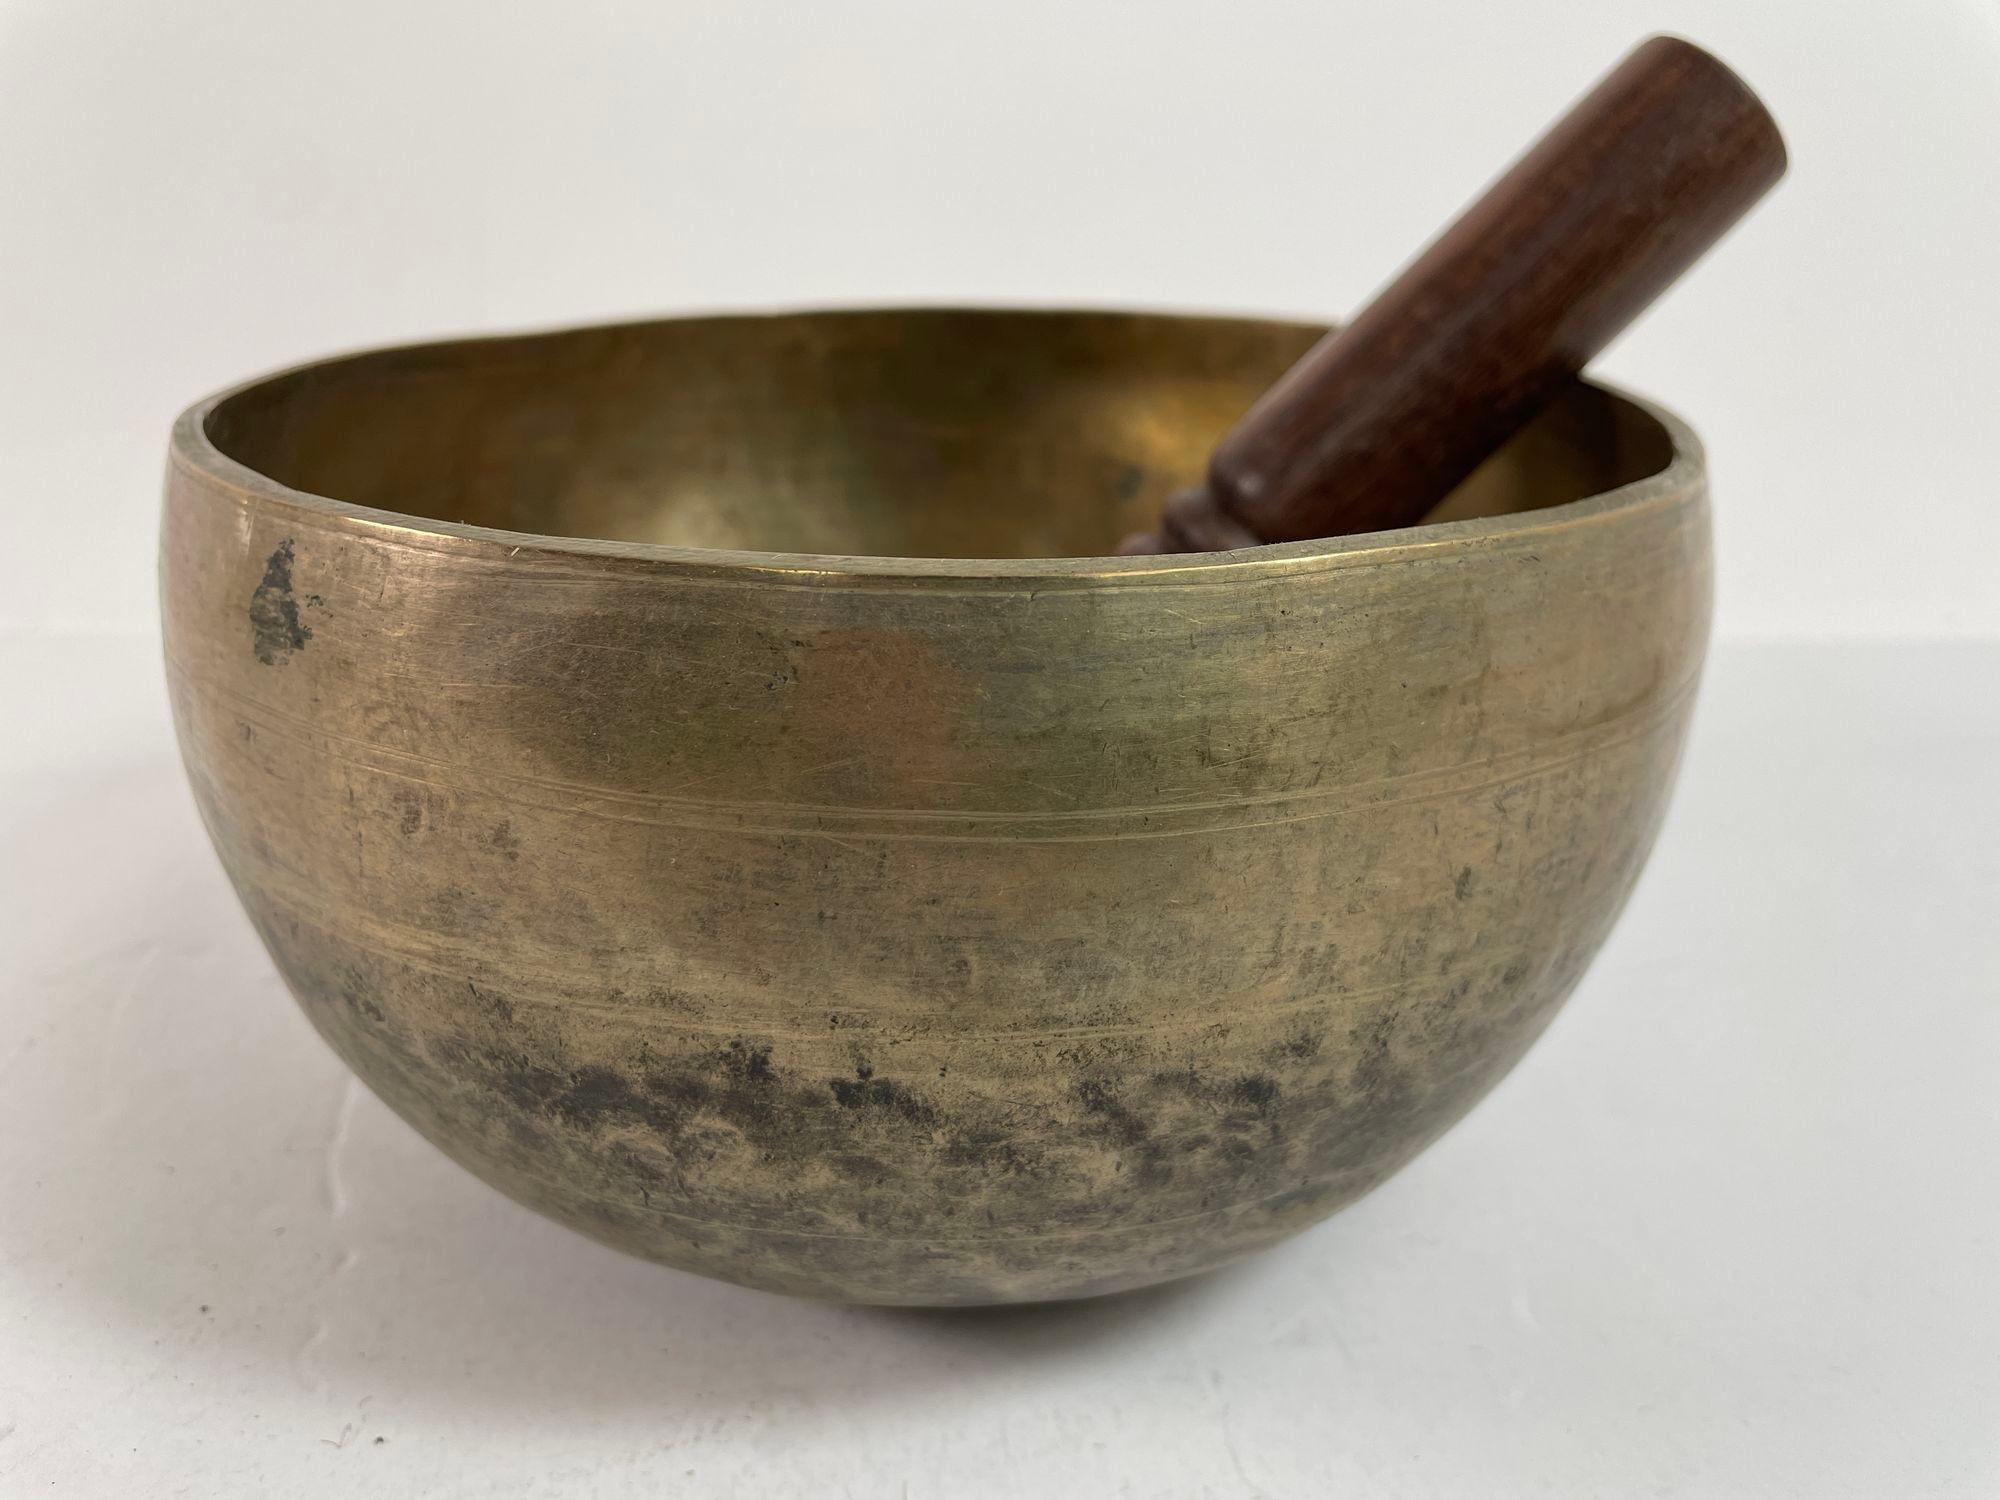 Vintage Asian Hammered Bronze Singing Bowl 1950s.
Asian Bronze Vessel Singing Bowl.
A special collectible piece.
Made from bronze, a good heavy weight.
Circa 1950s.
The hand-hammered Asian bronze bowls are used in some Buddhist religious practices